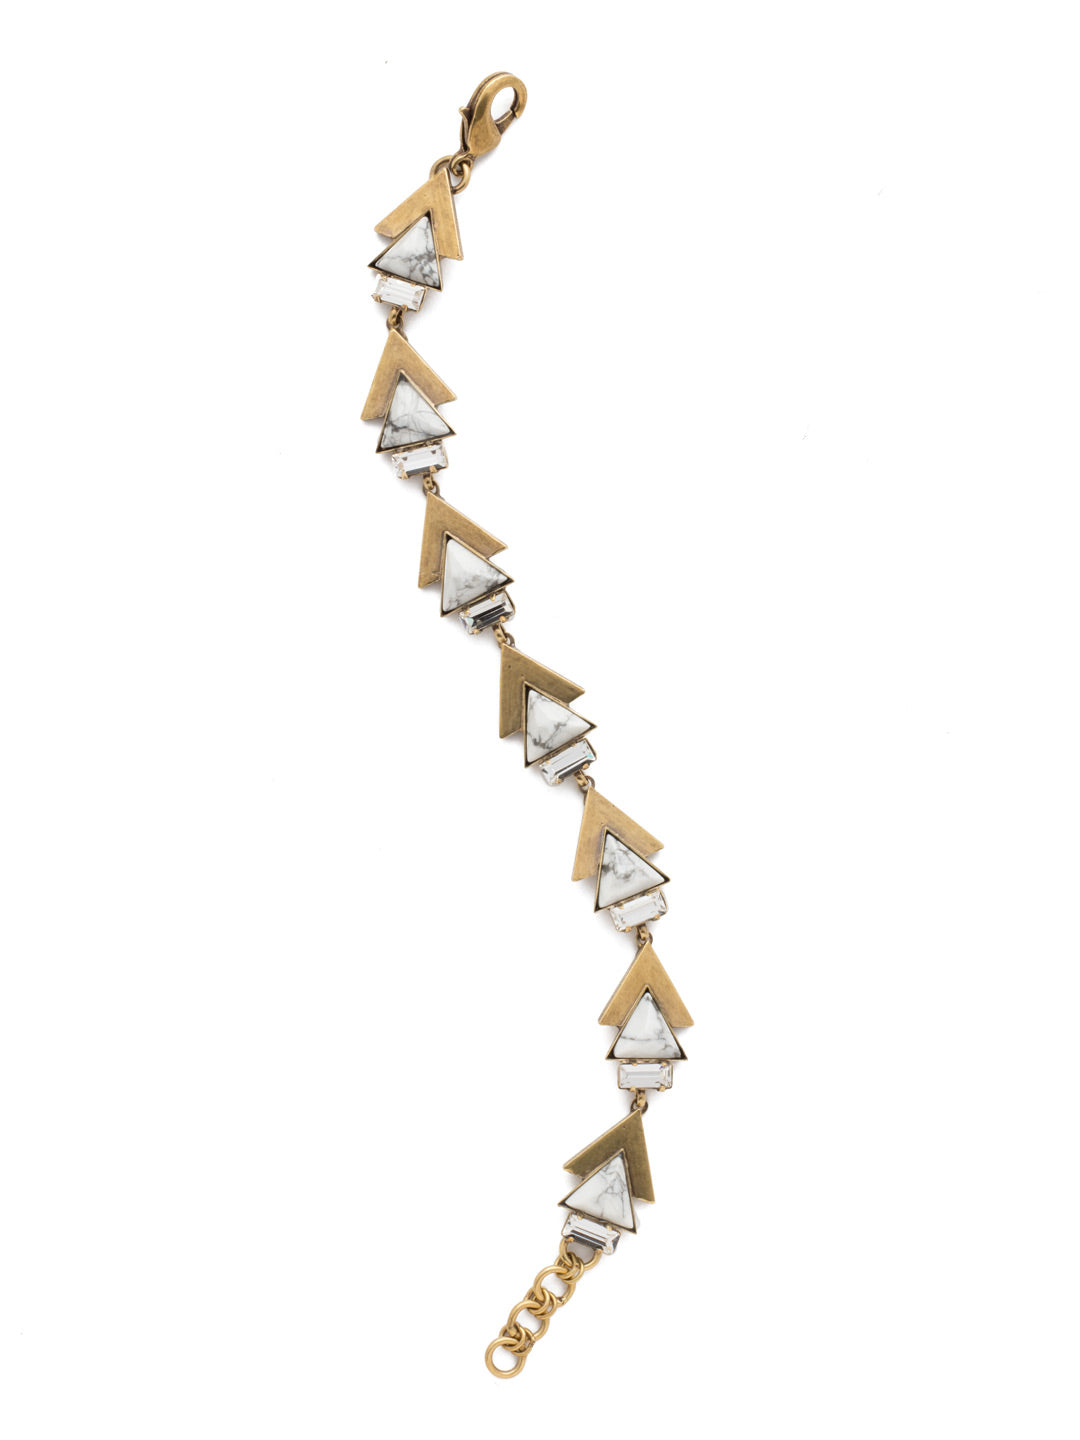 Eroh Line Bracelet - BEB6AGIND - <p>Delicate baguette crystals bring a sparkling touch to this bracelet, featuring a deco-art design of triangle-shaped metalwork and stones. A casual dressing staple for everyday wear. From Sorrelli's Industrial collection in our Antique Gold-tone finish.</p>